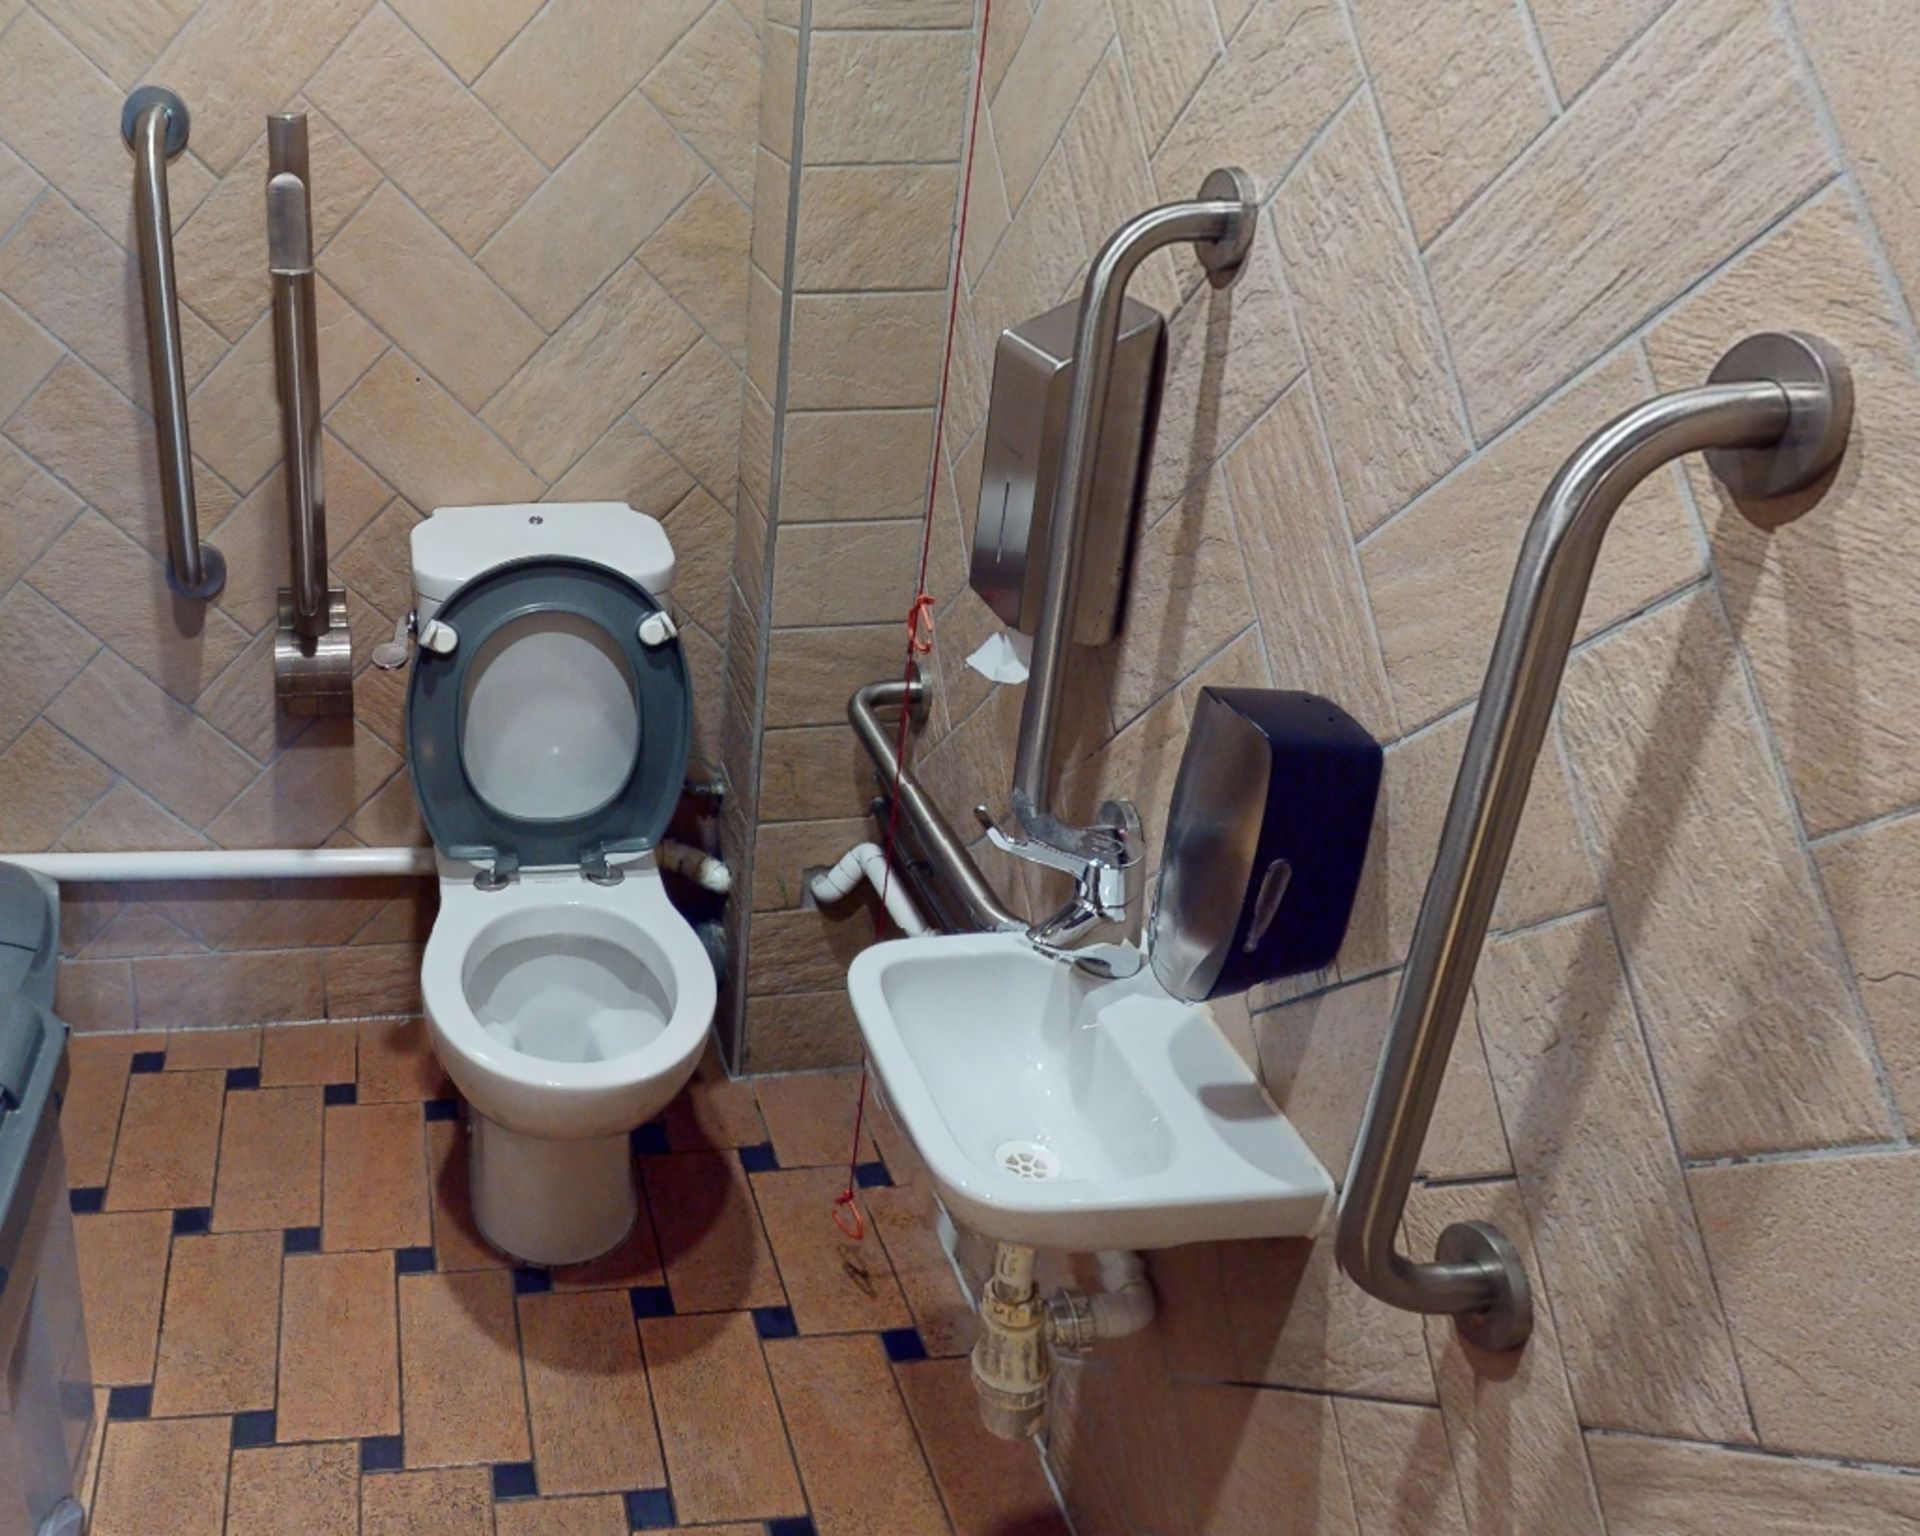 1 x Disabled Bathroom Suite - Includes 1 x Toilet, 1 x Sink With Mixer Tap and 5 x Chrome Safety - Image 3 of 3